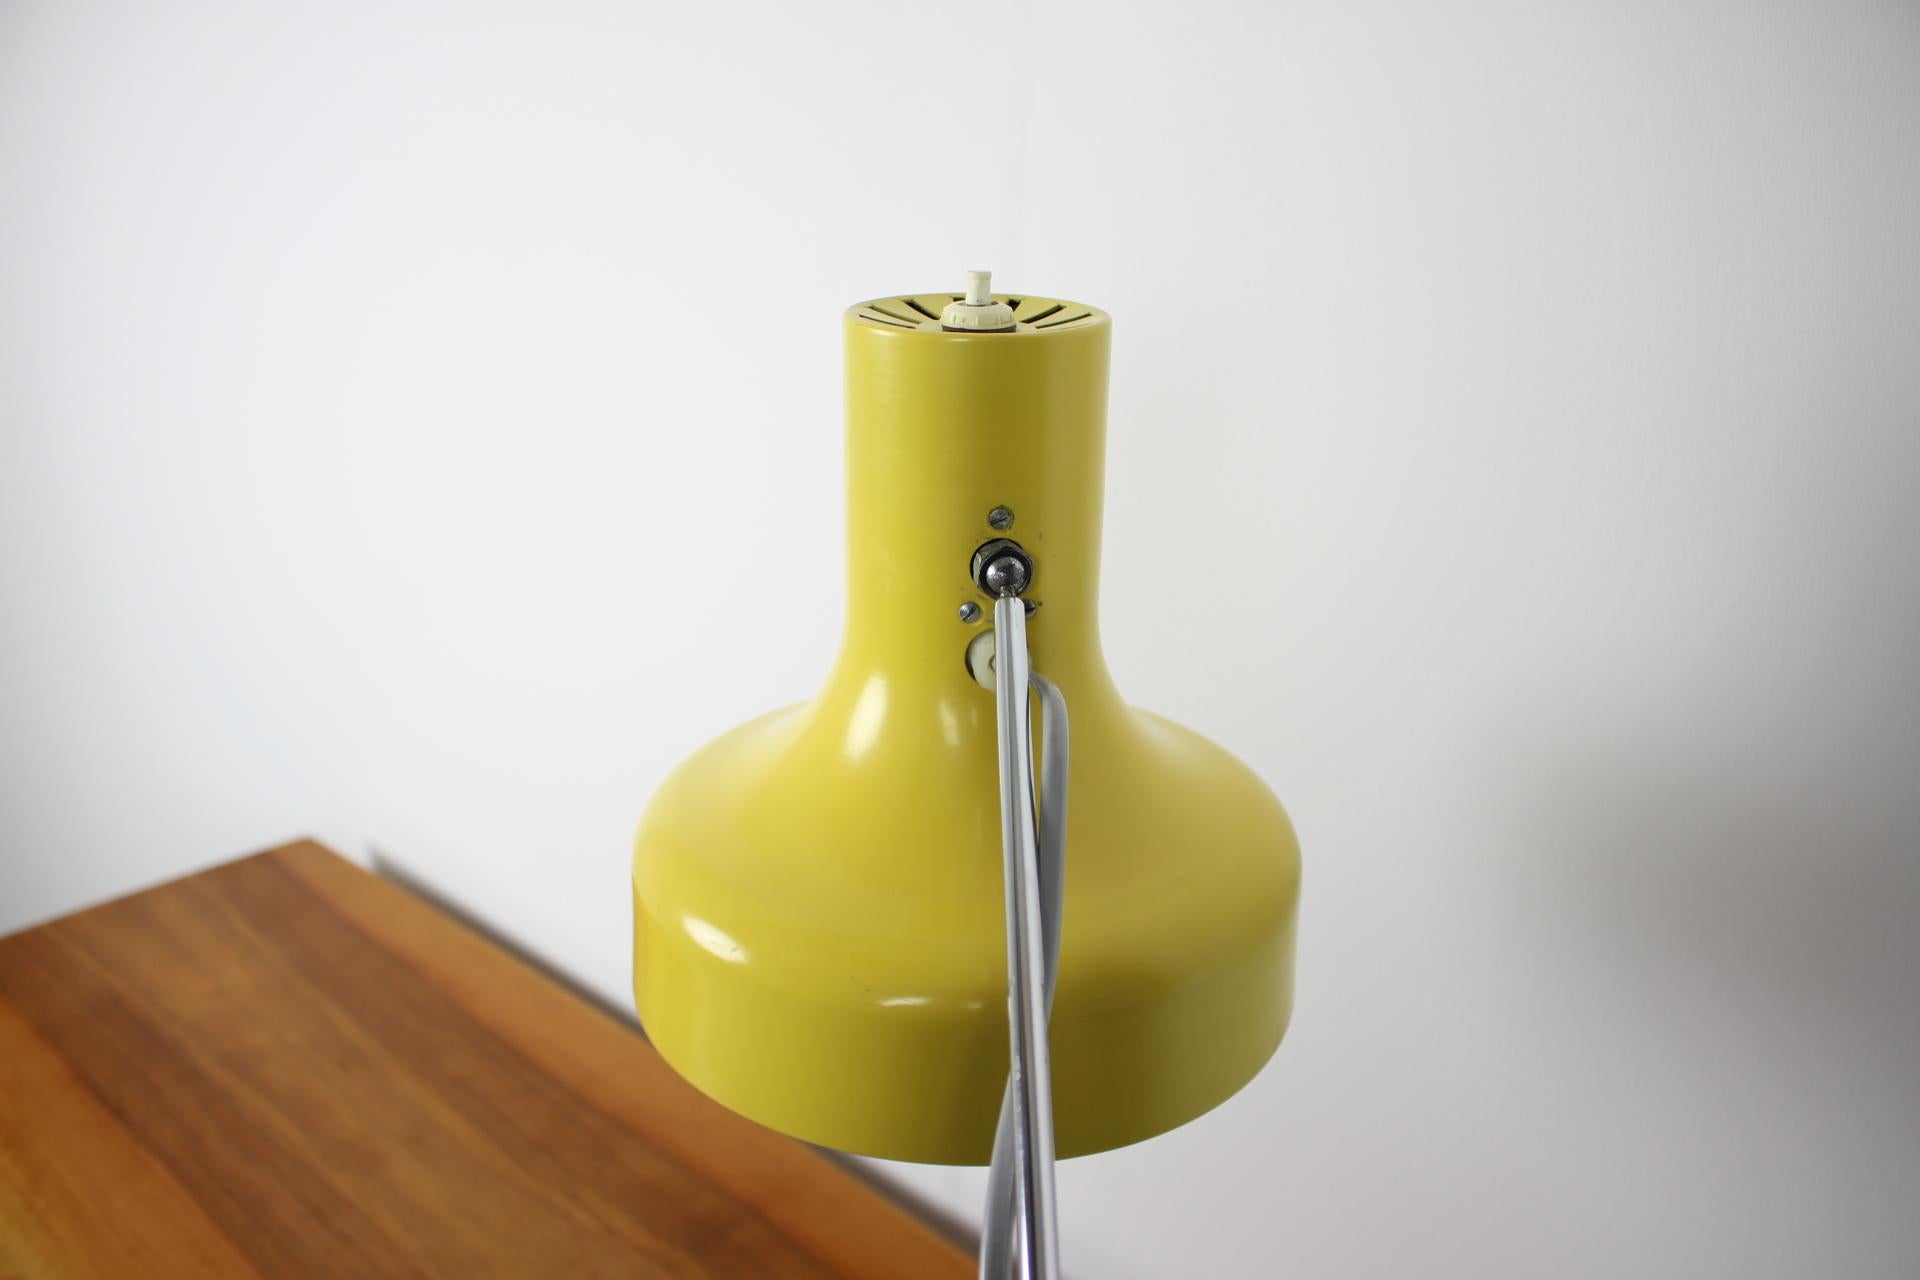 Midcentury Adjustable Table Lamp Designed by Josef Hůrka for Napako In Good Condition For Sale In Praha, CZ